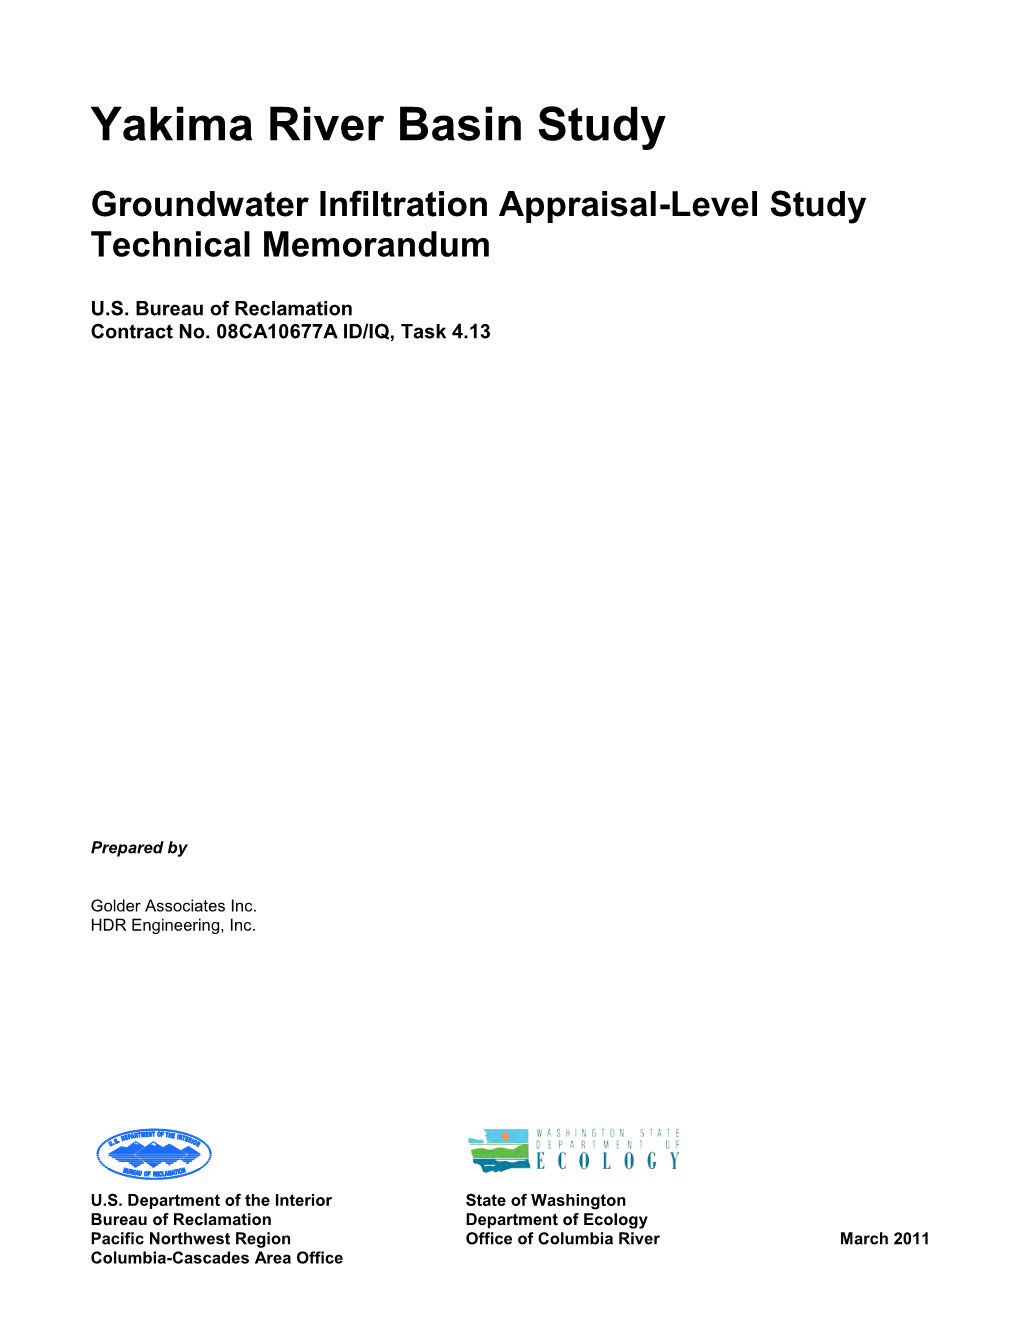 Task 4.13 Groundwater Infiltration